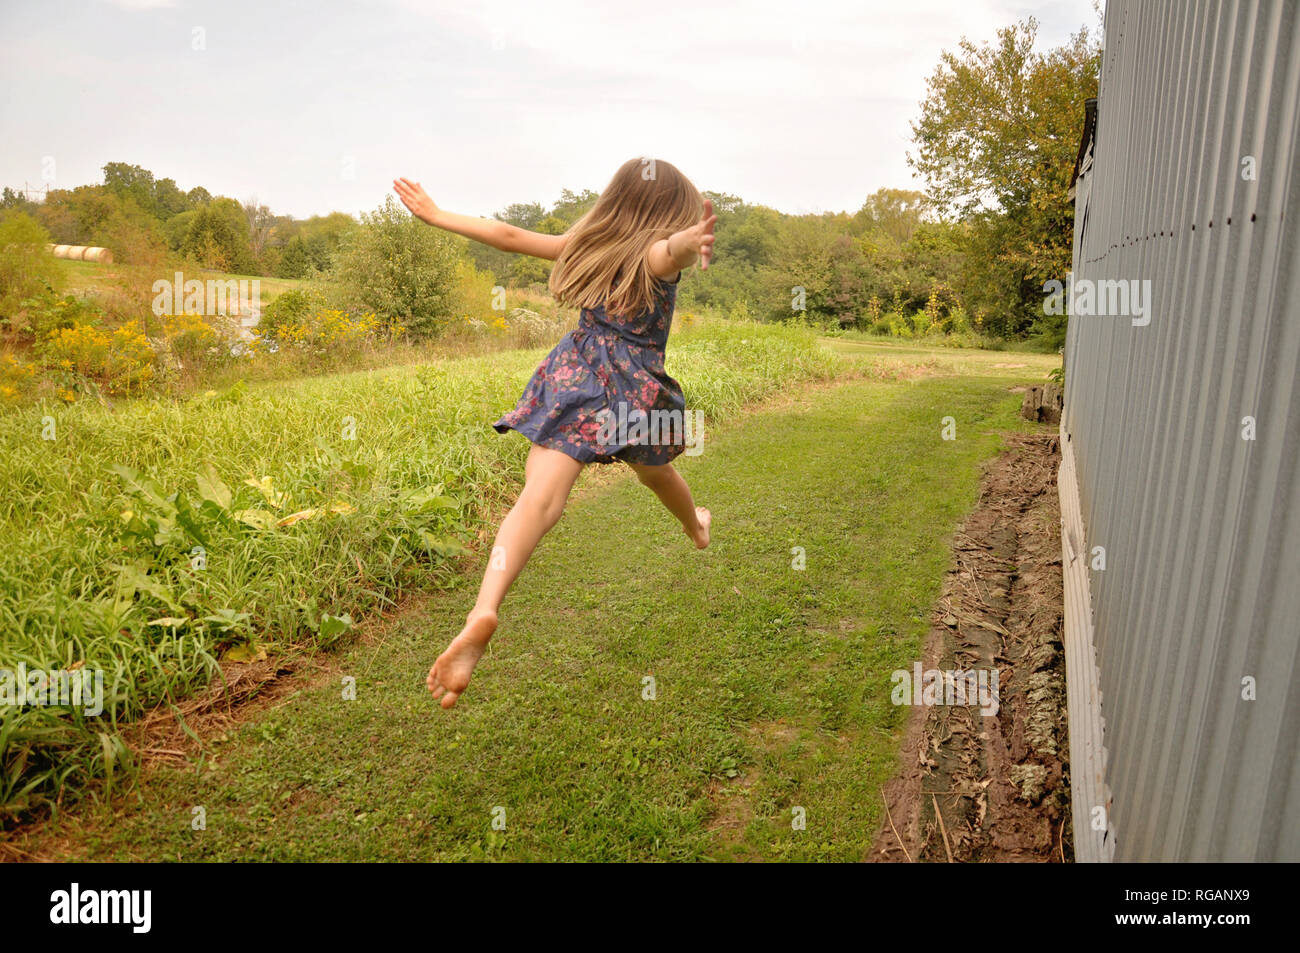 girl in a dress playing in the country Stock Photo